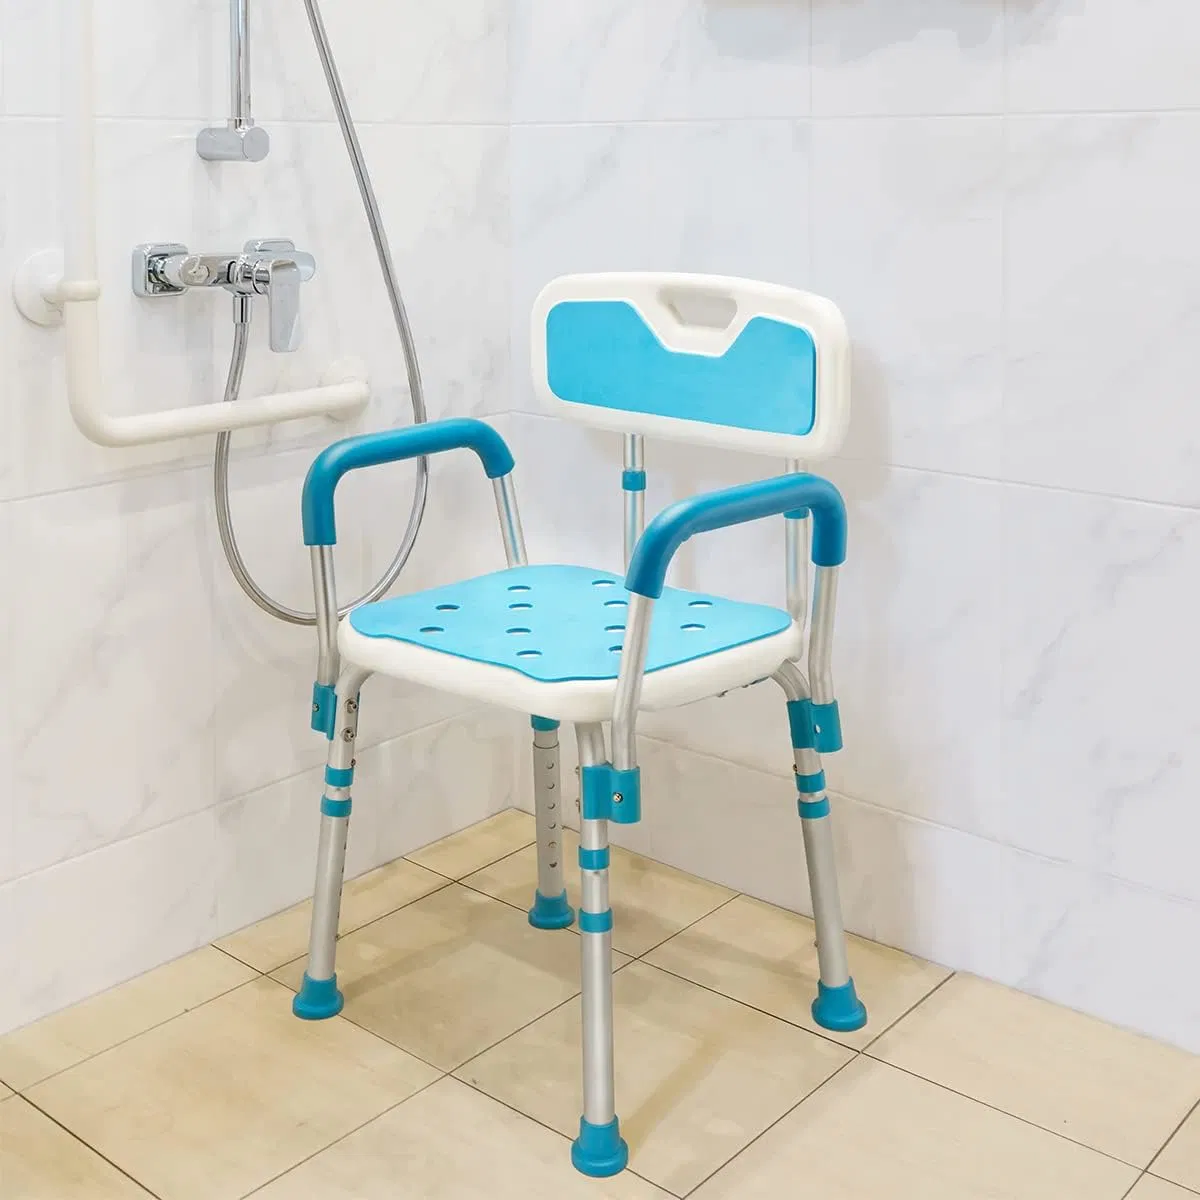 Bliss Medical Adjustable Shower Chair Bathtub Seat with Back Removable Arms for Handicap Disabled Elderly